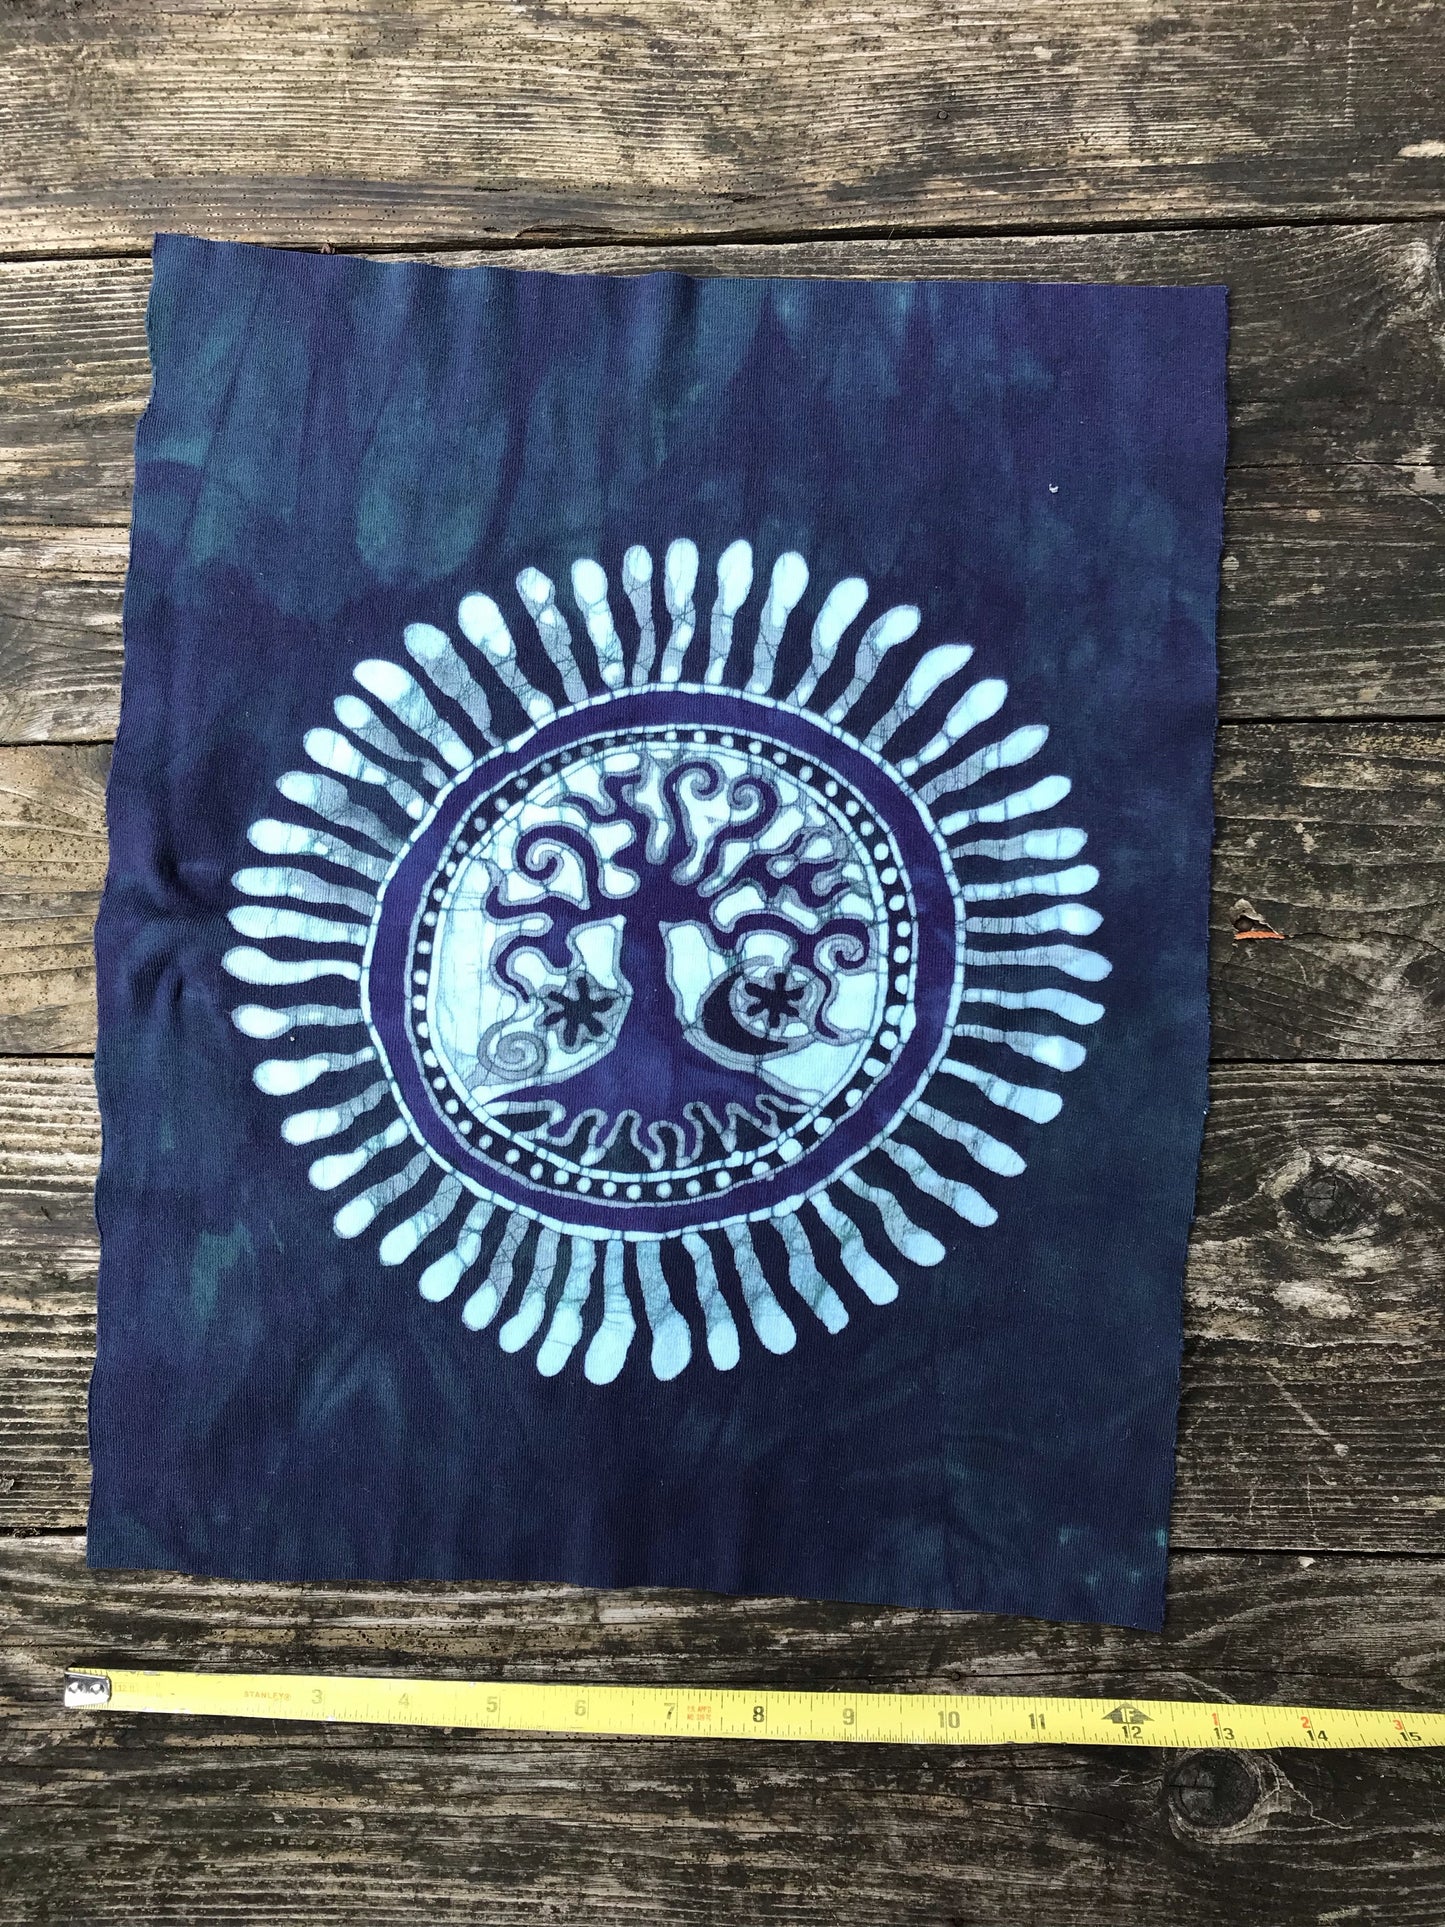 Hand Painted Batik Fabric Square - Tree of Life in Teal and Purple Batikwalla by Victoria 